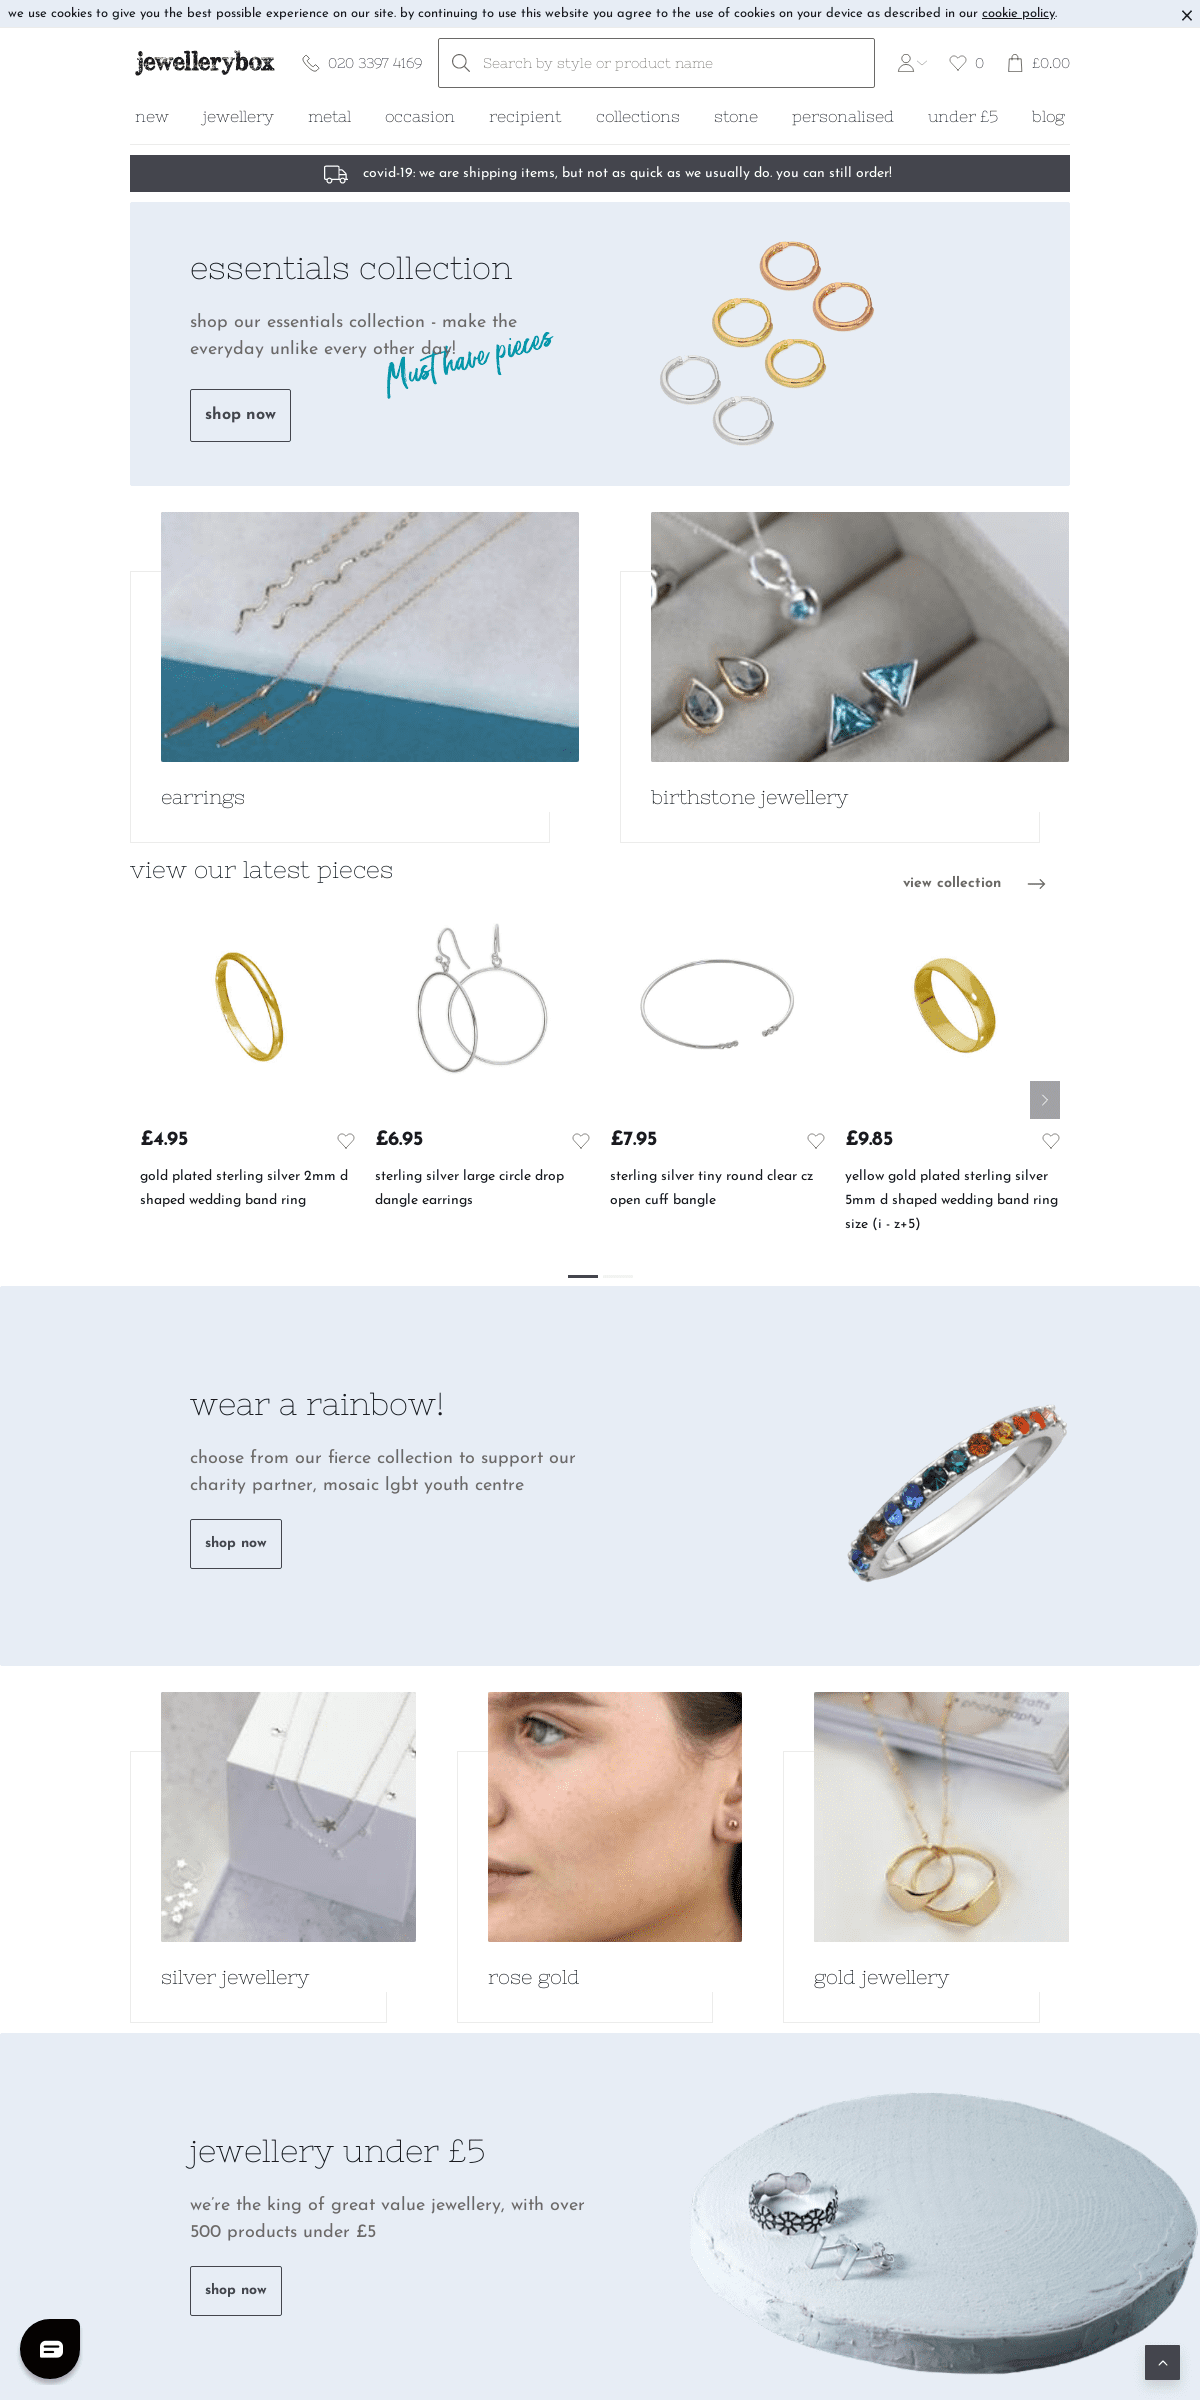 A complete backup of jewellerybox.co.uk